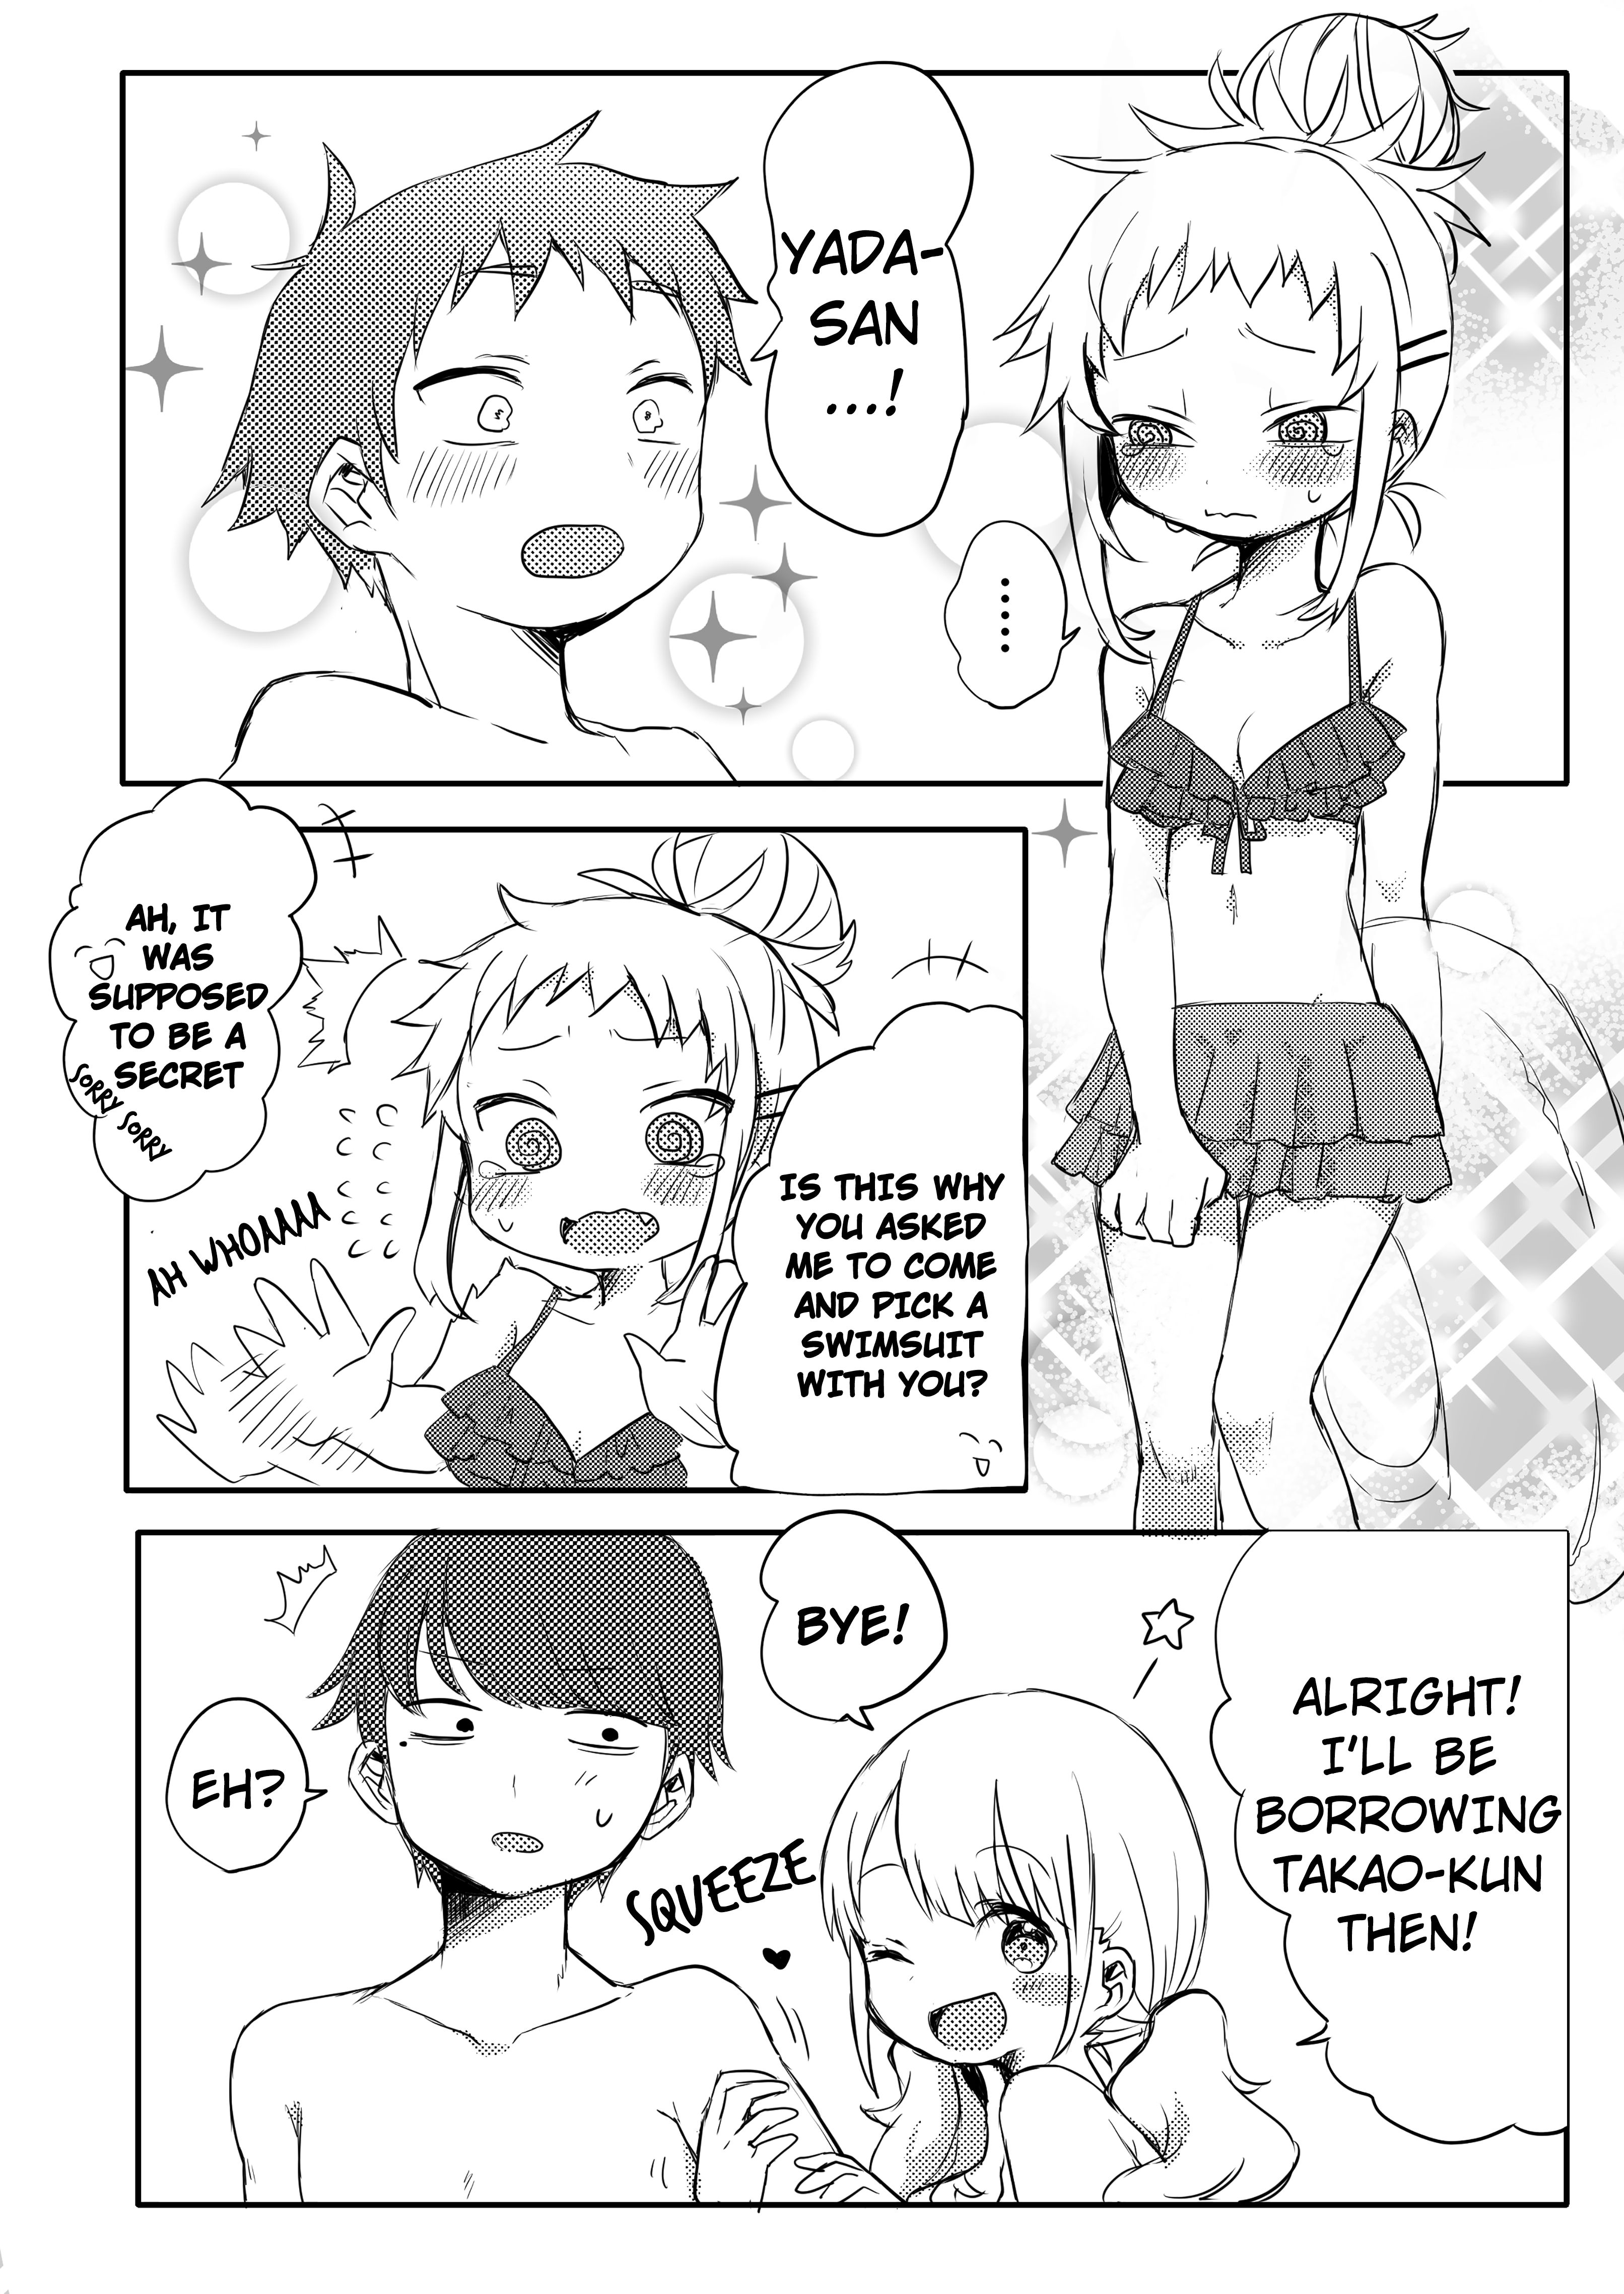 Yada-san is cold - chapter 4 - #3